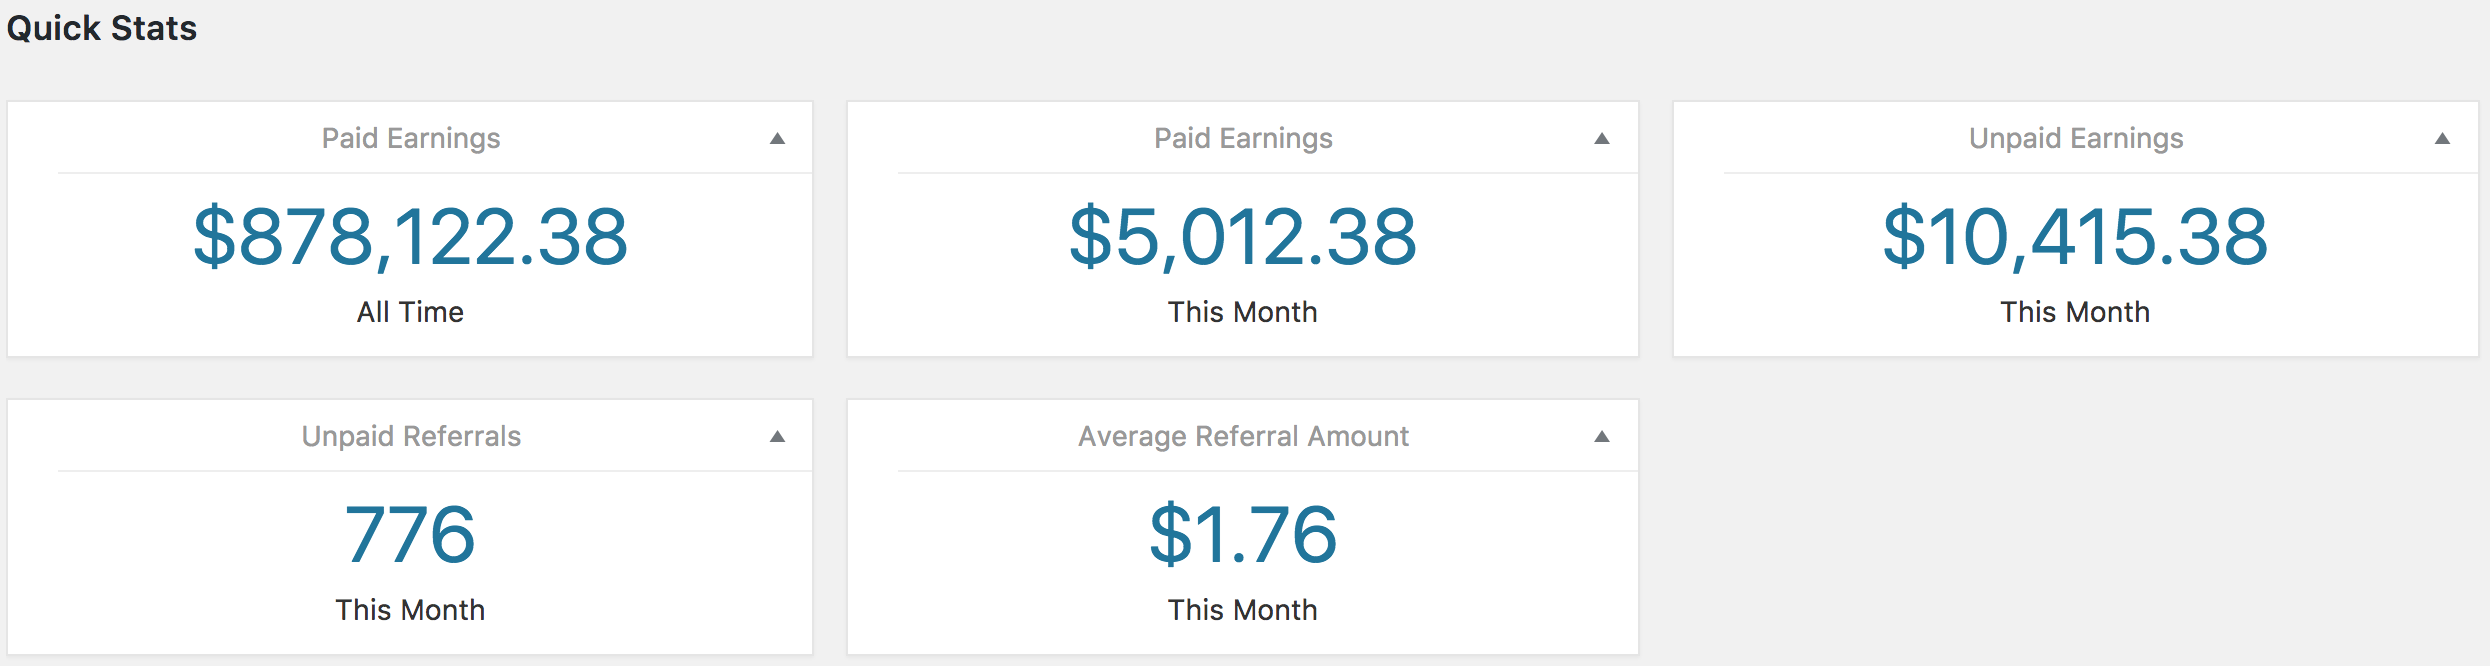 An example of Quick Stats available in the Referrals tab of the Reports section in AffiliateWP.